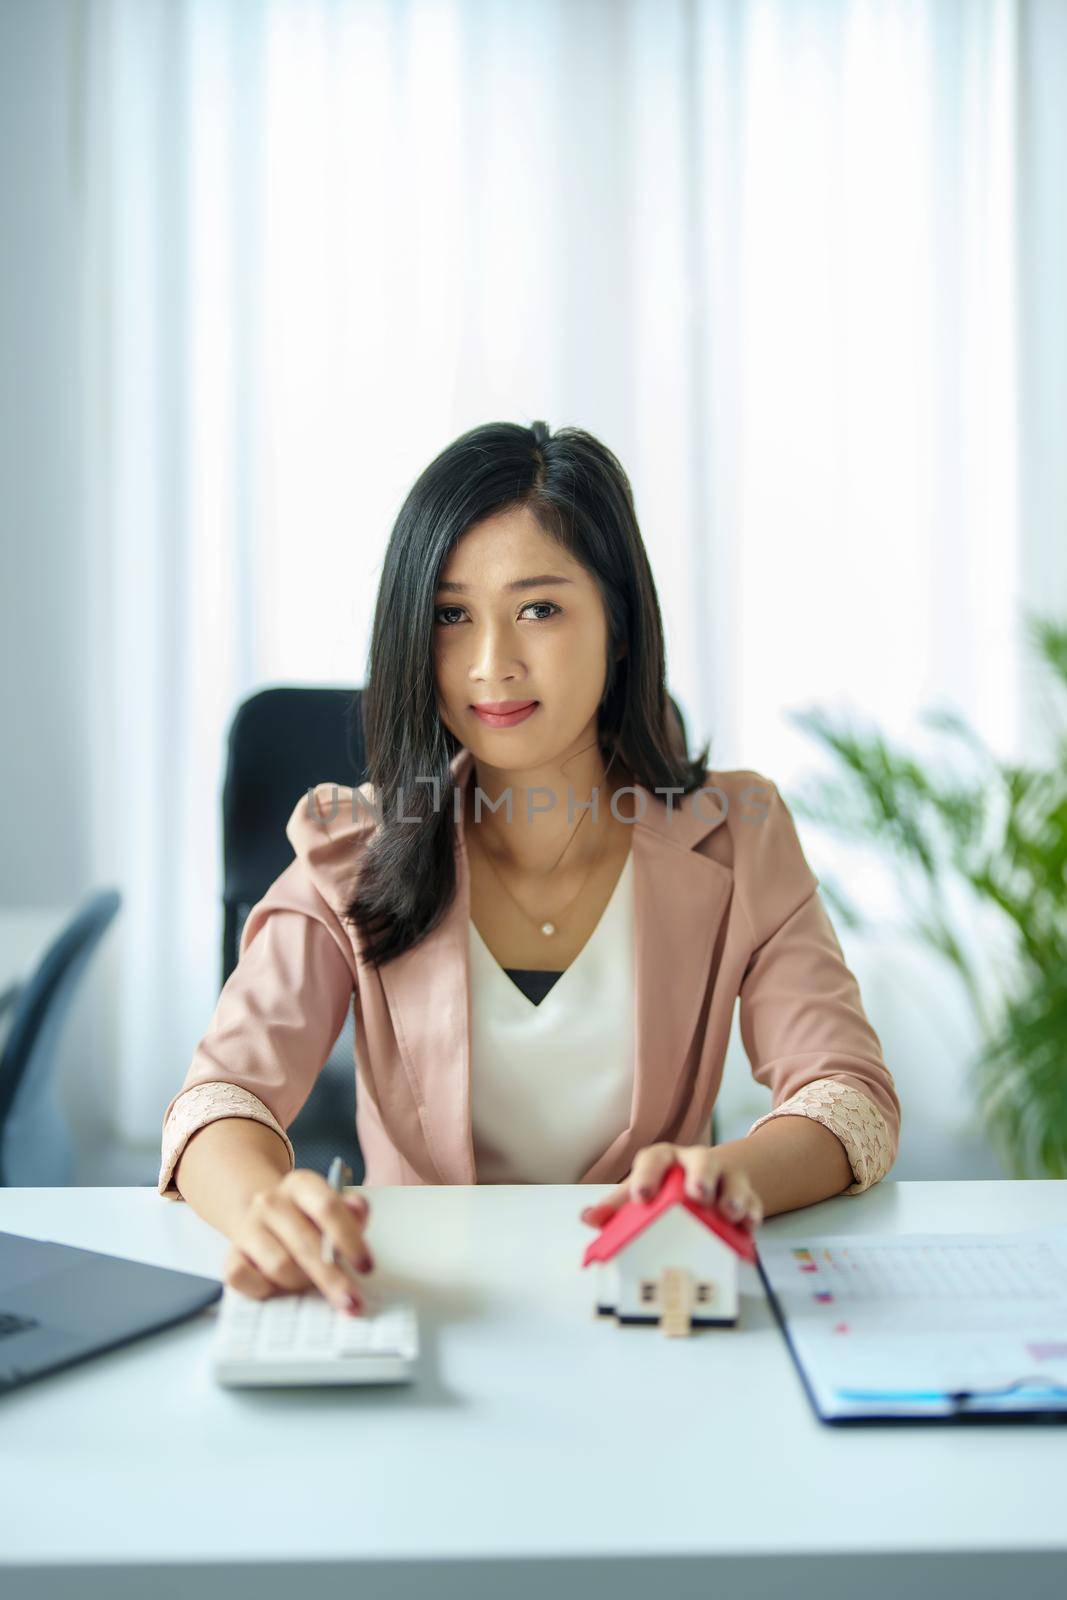 Entrepreneurs, business owners, accountants, real estate agents, Portrait of asian woman uses a calculator to calculate her home budget to assess the risks of investing in real estate